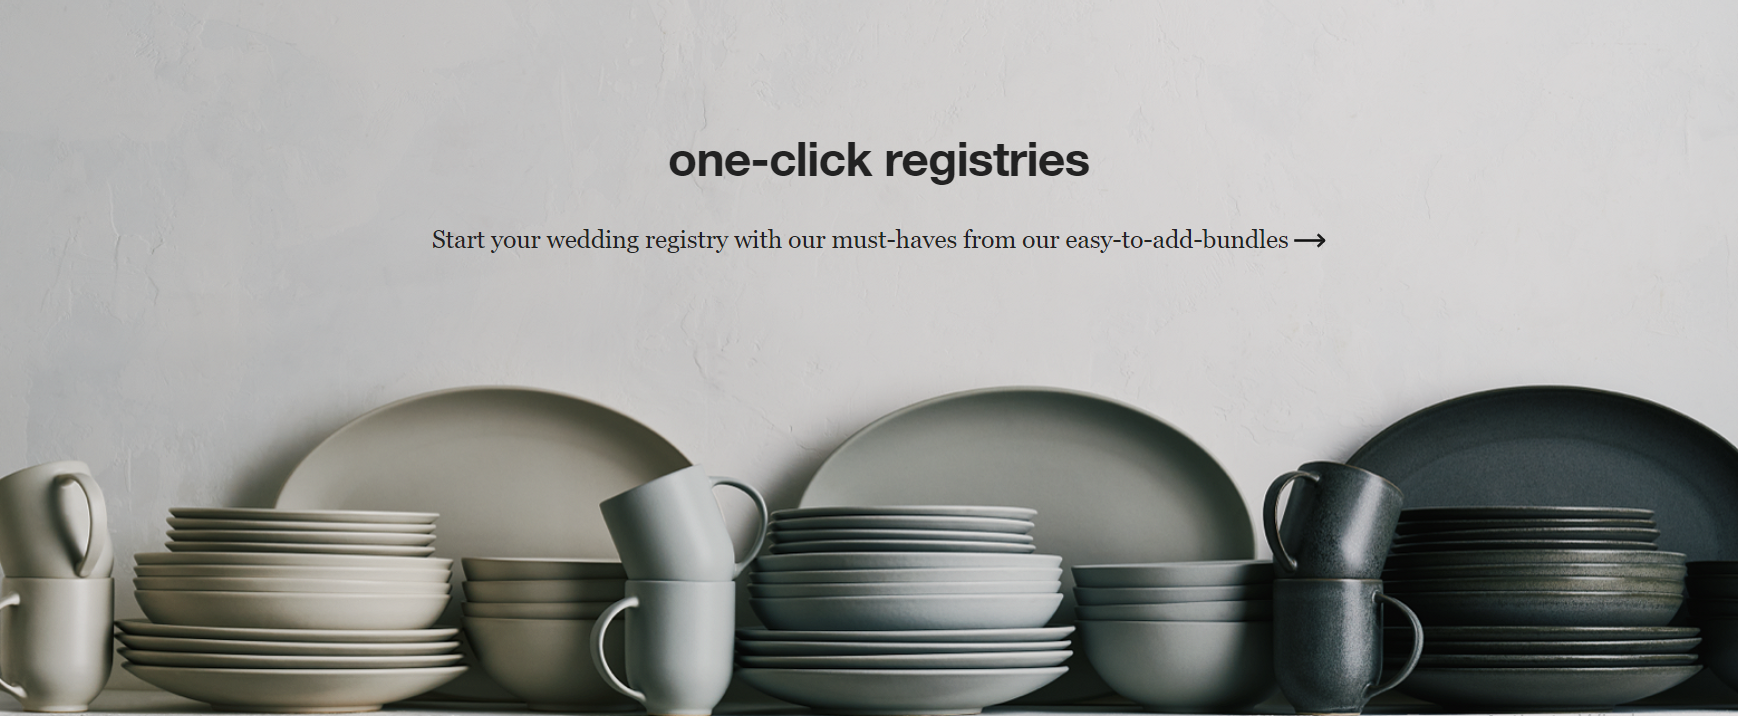 One-lick registries on Crate And Barrel wedding page.